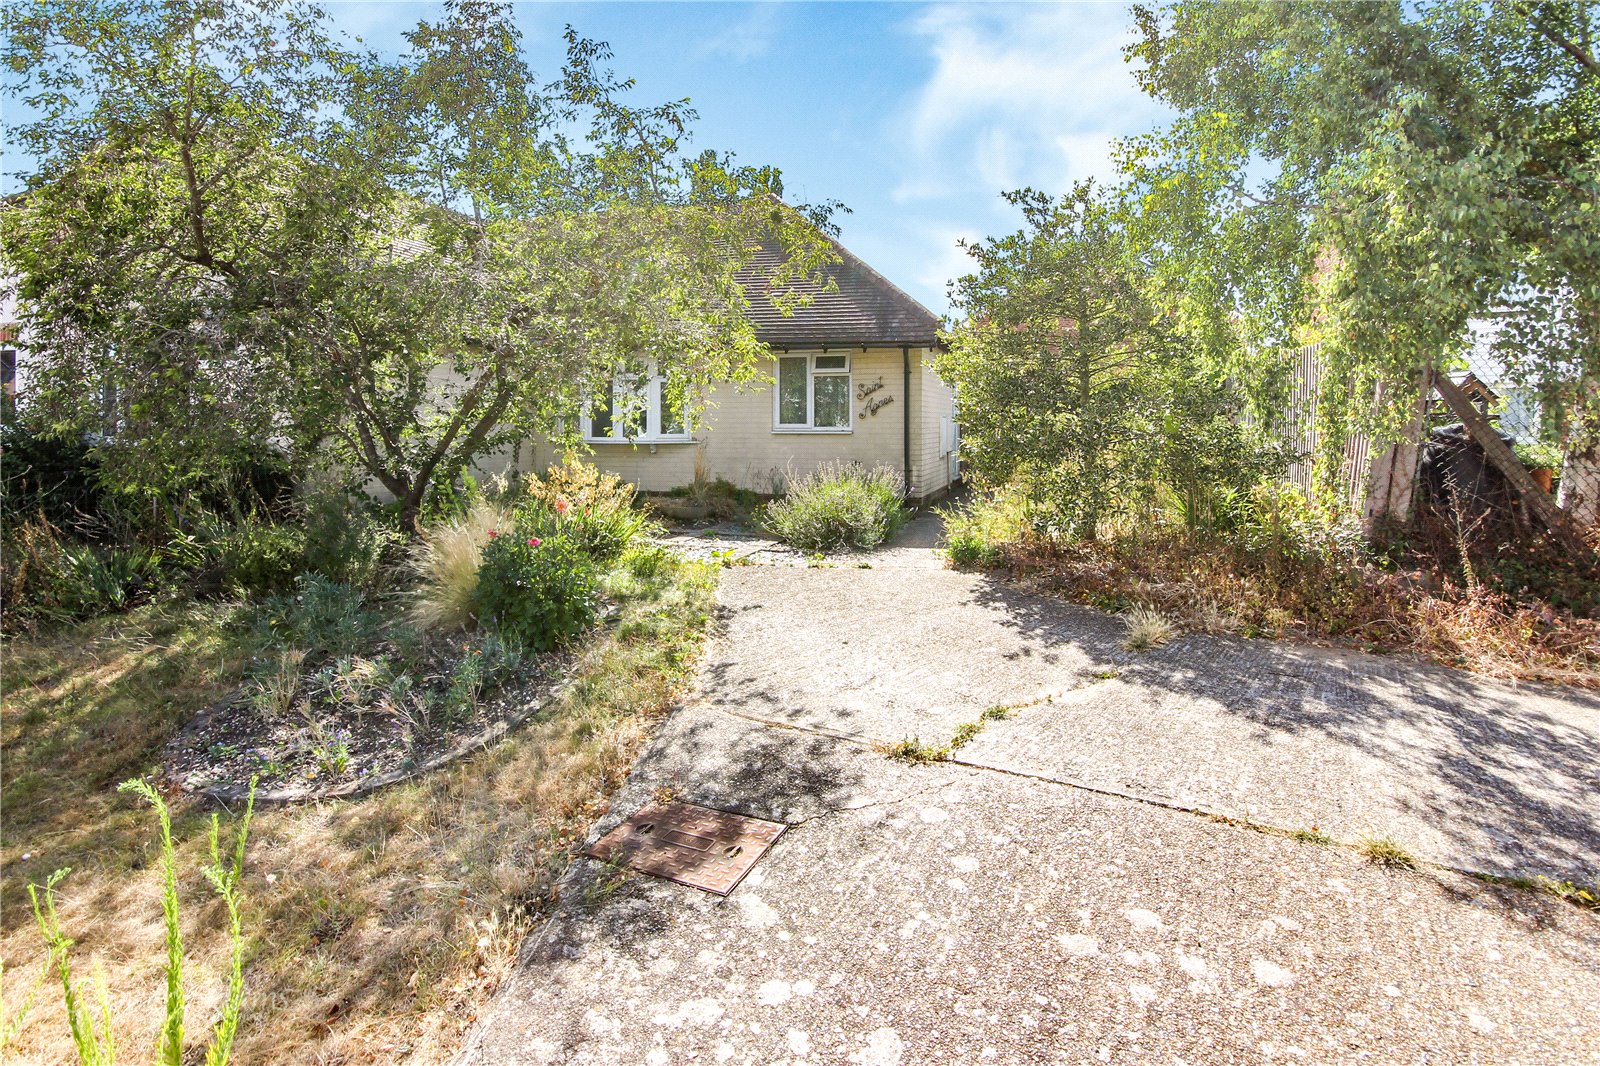 2 bed bungalow for sale  - Property Image 1